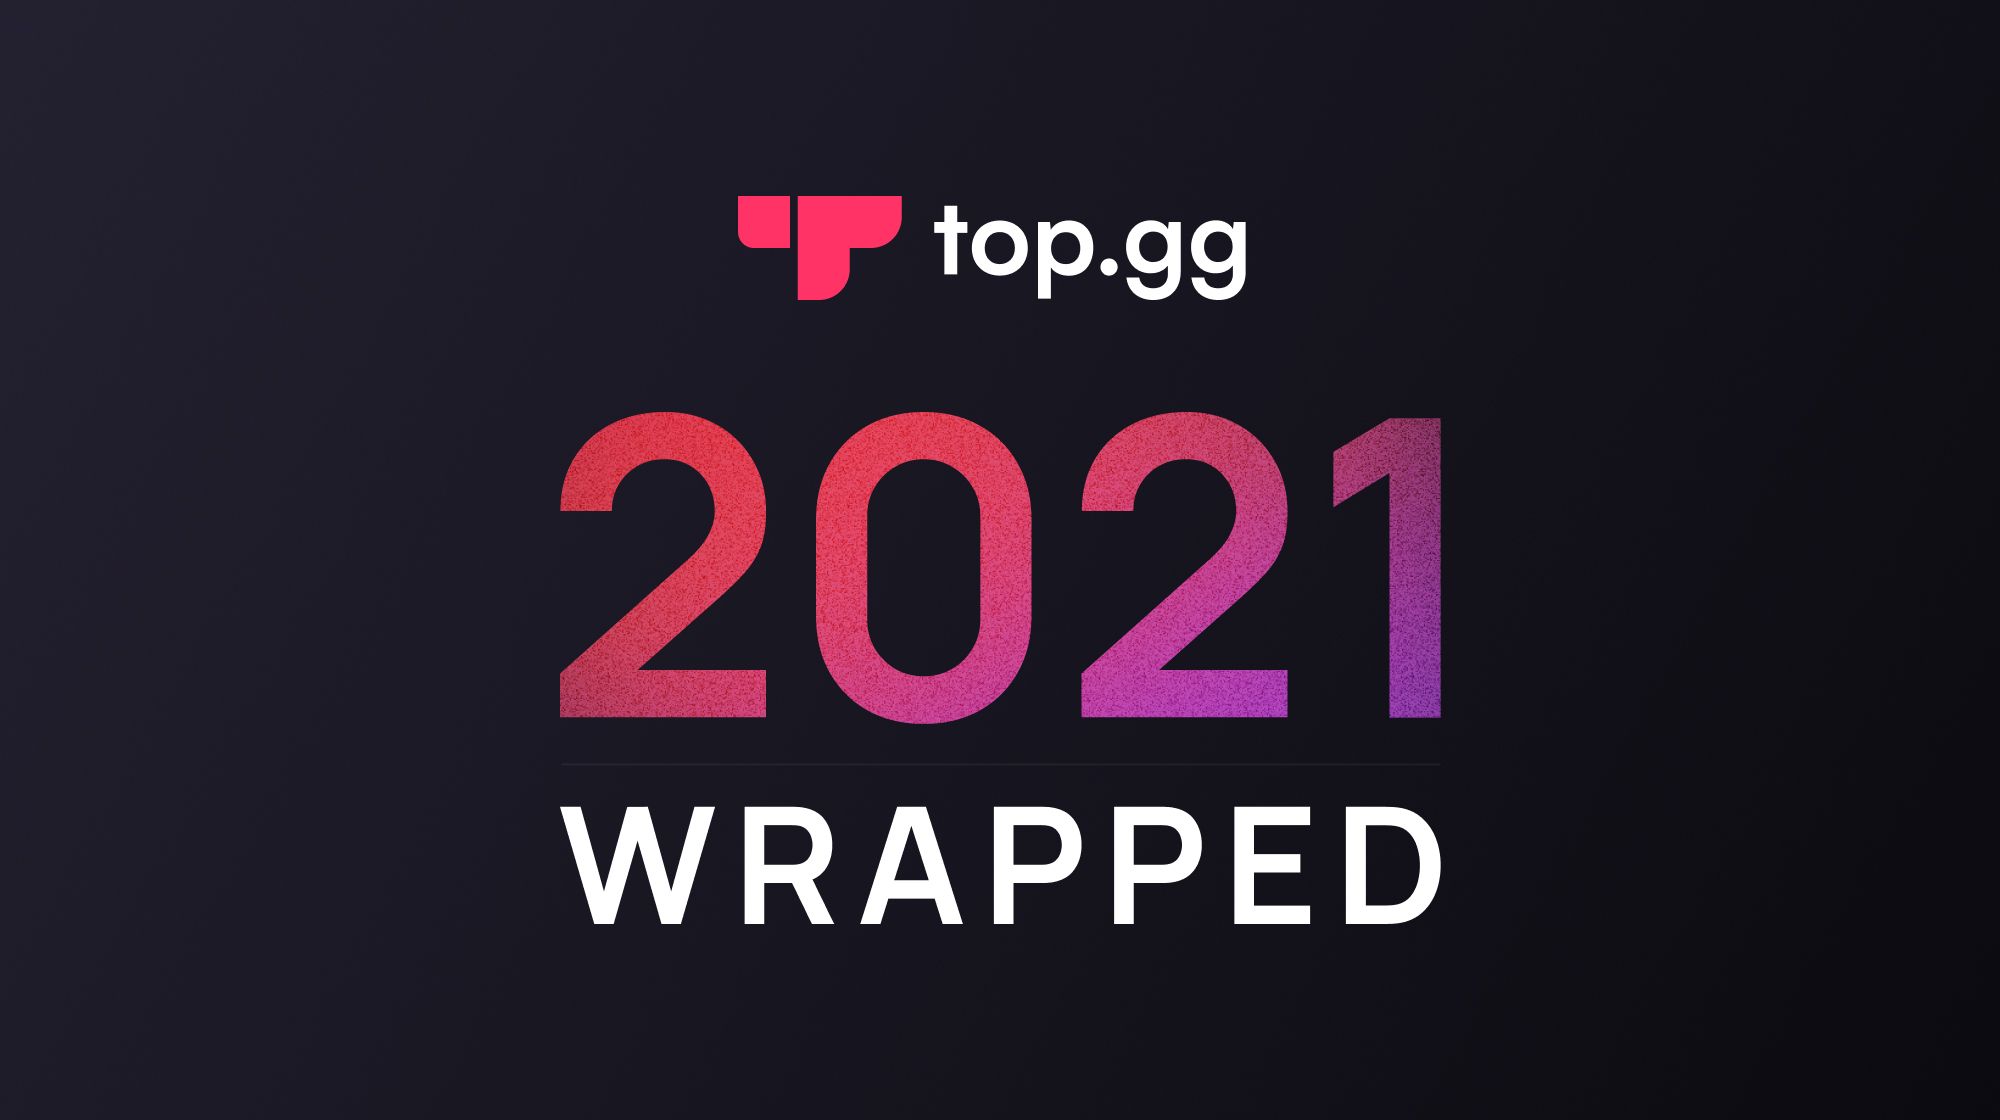 Top.gg 2021 Wrapped